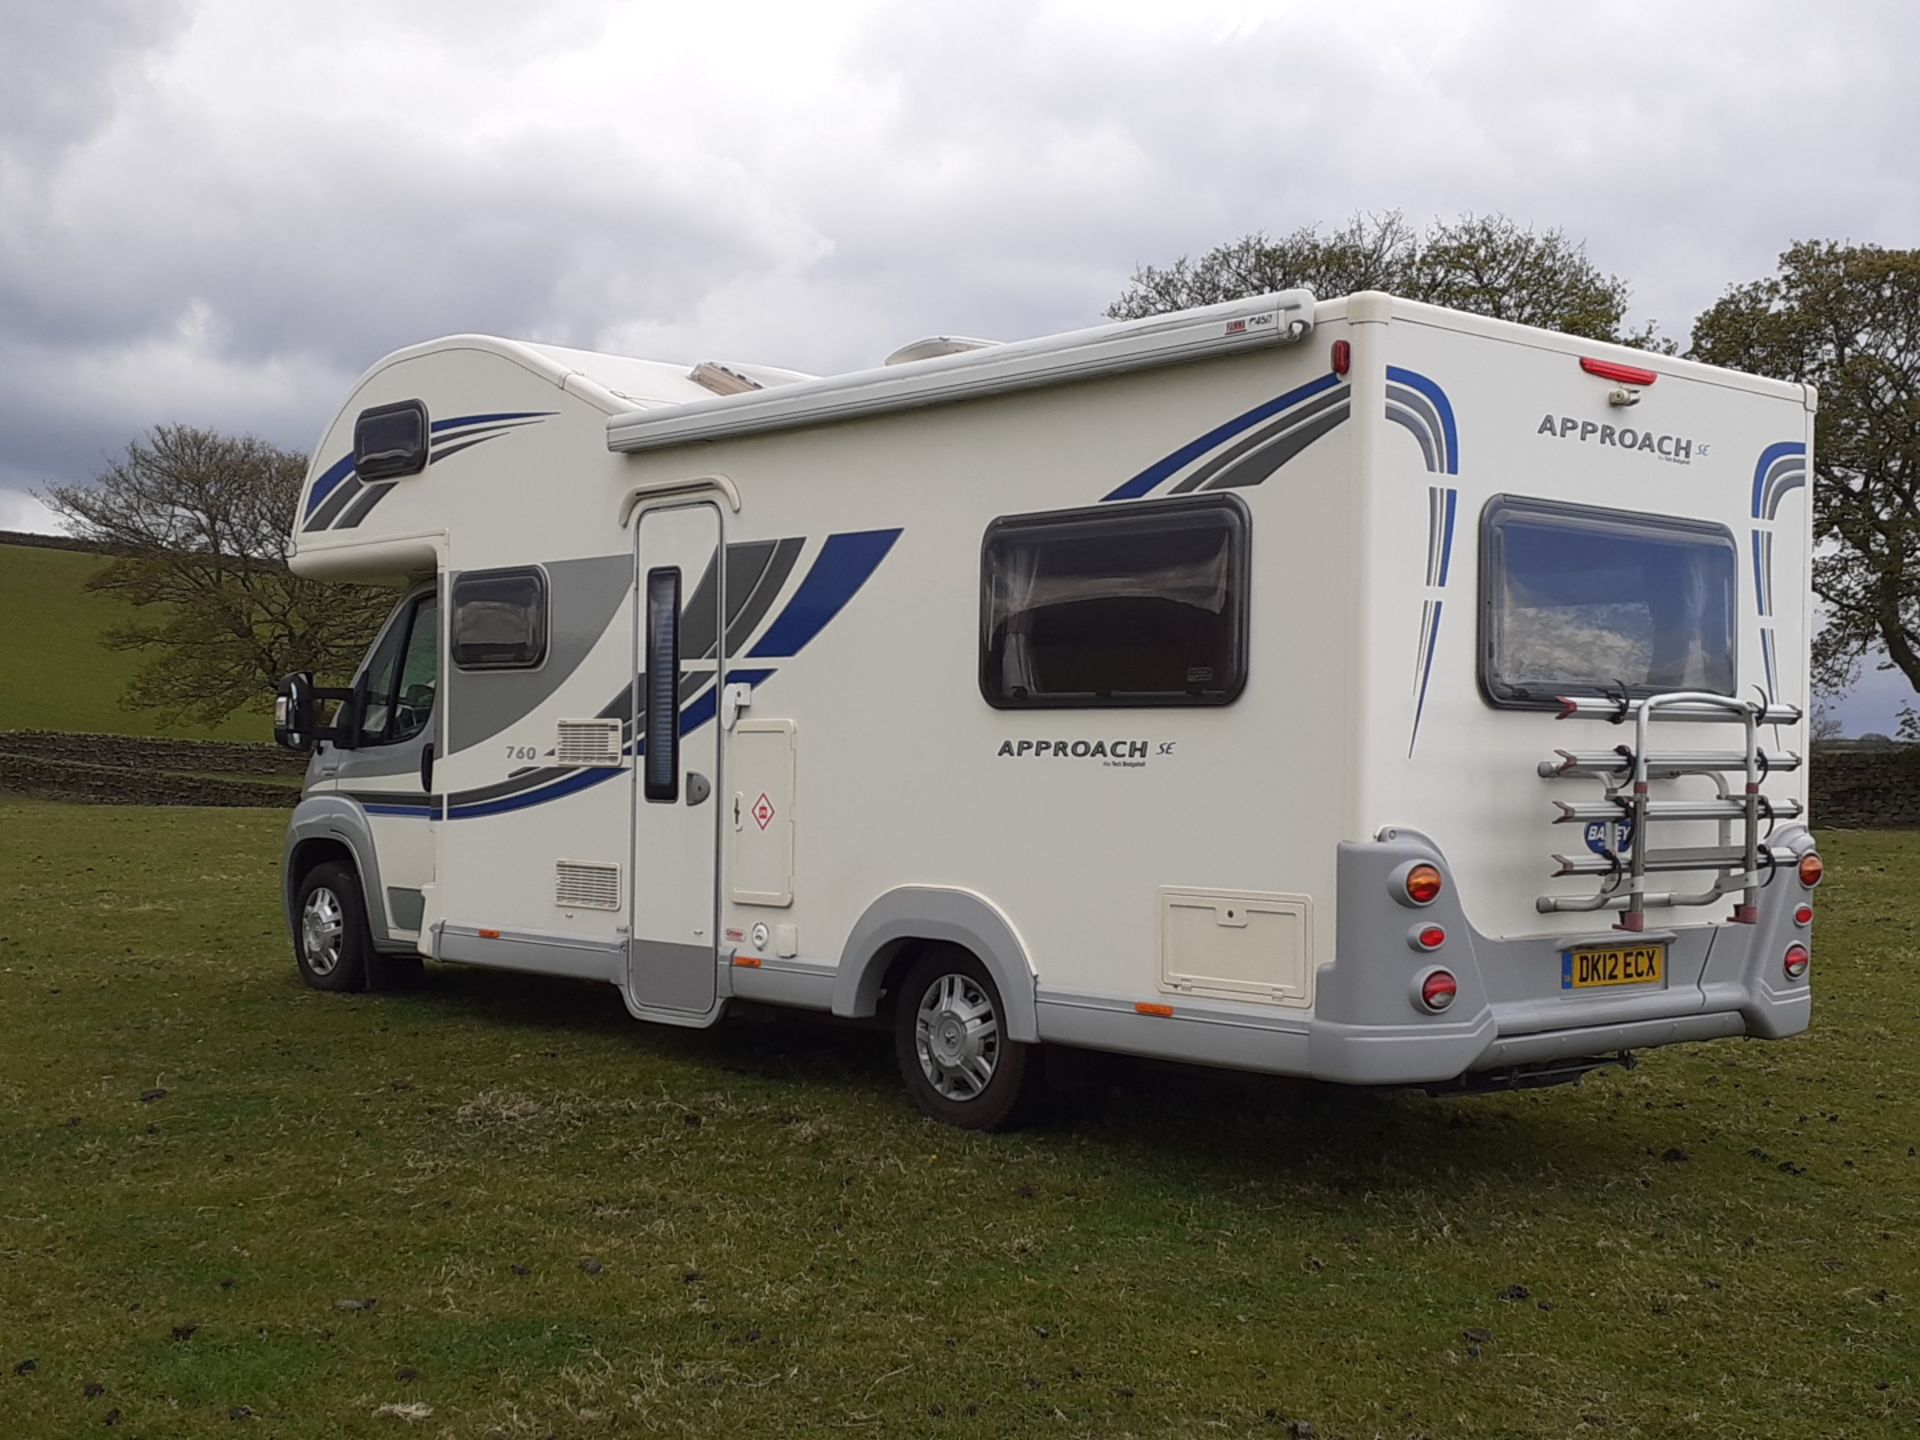 2012 BAILEY APPROACH 760 SE LUXURY 6 BERTH MOTORHOME £10K OF EXTRAS, 30,000 MILES FROM NEW - Image 7 of 31